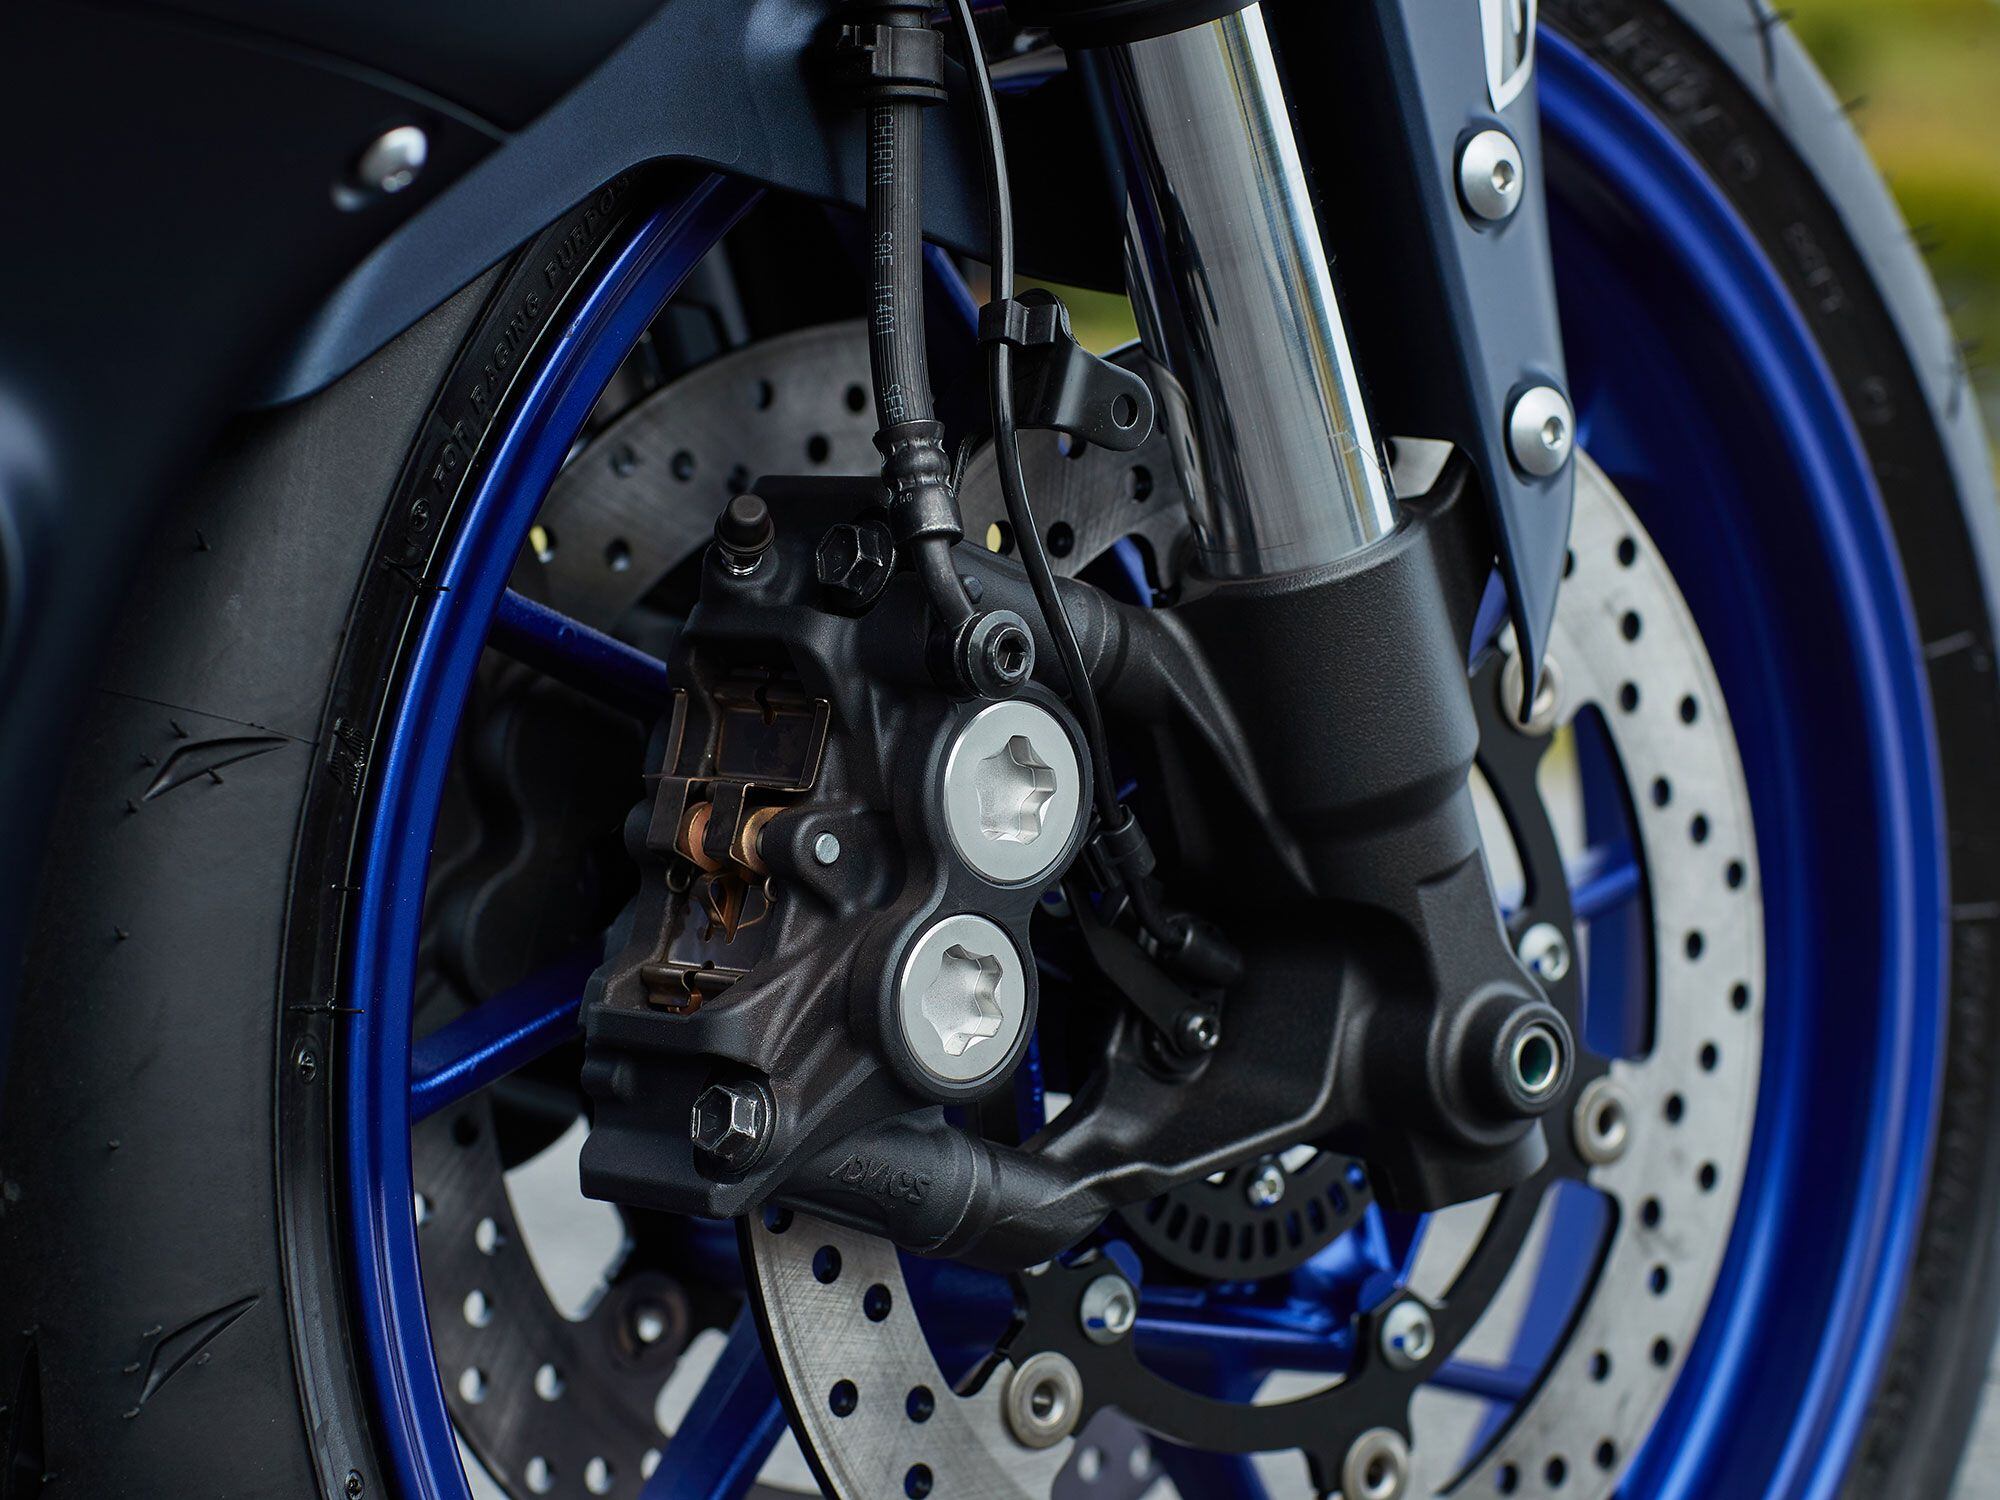 Although the R7 employs an inverted fork with full adjustment, it’s components don’t have the same level of lofty performance as the YZF-R6 and YZF-R1.